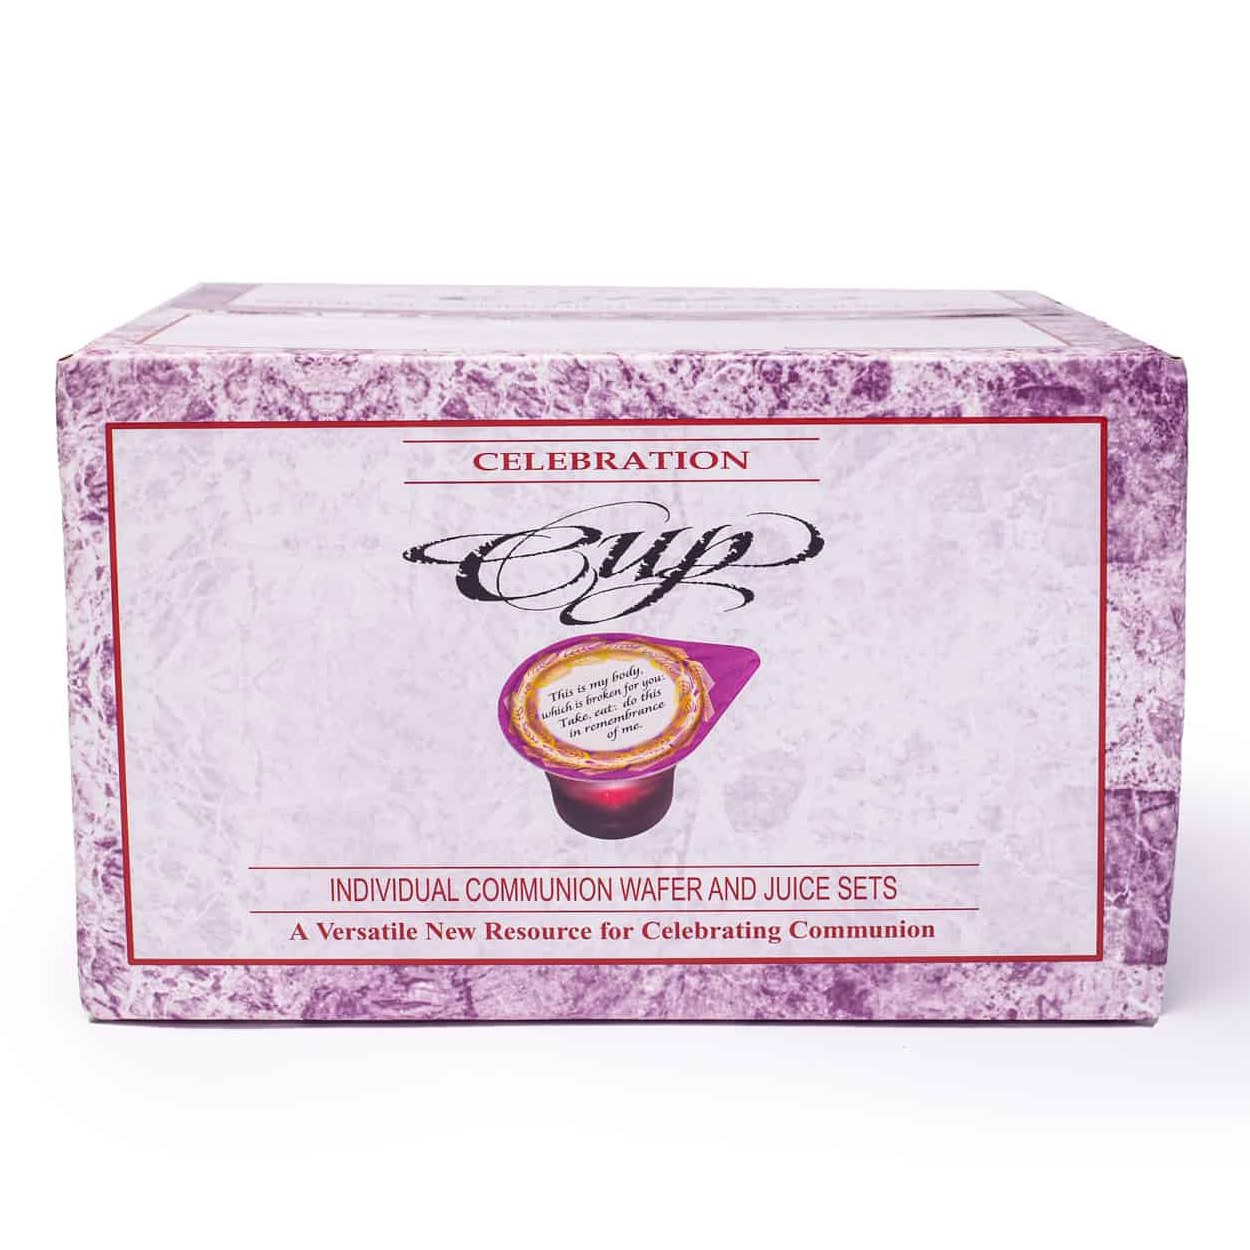 Prefilled Communion Cups (250 count)